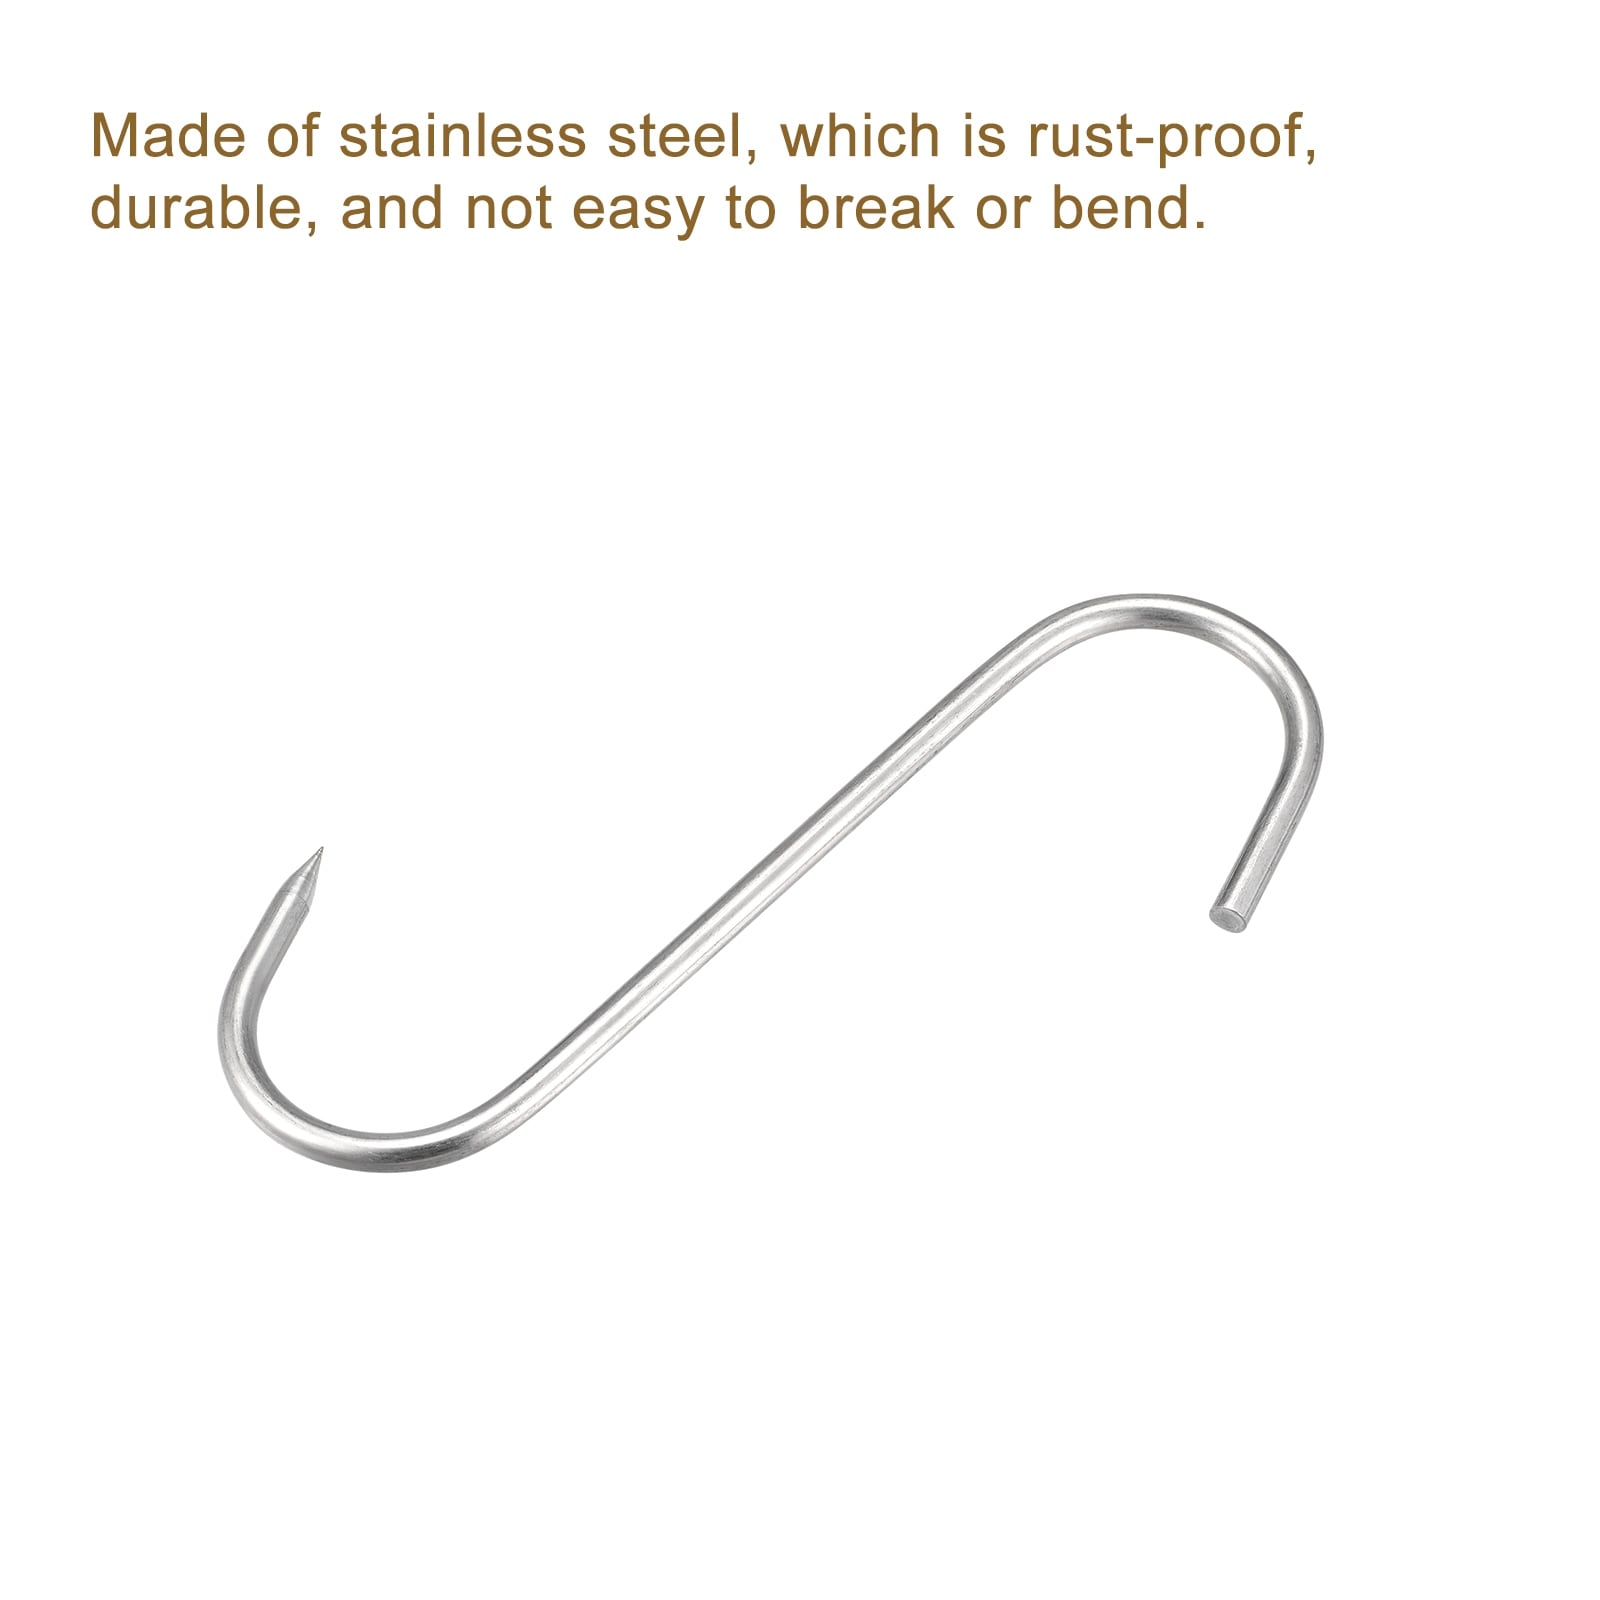 5.91 Meat Hooks, 0.24 Thick Stainless Steel S-Hook Meat Processing 1Pcs -  Silver Tone